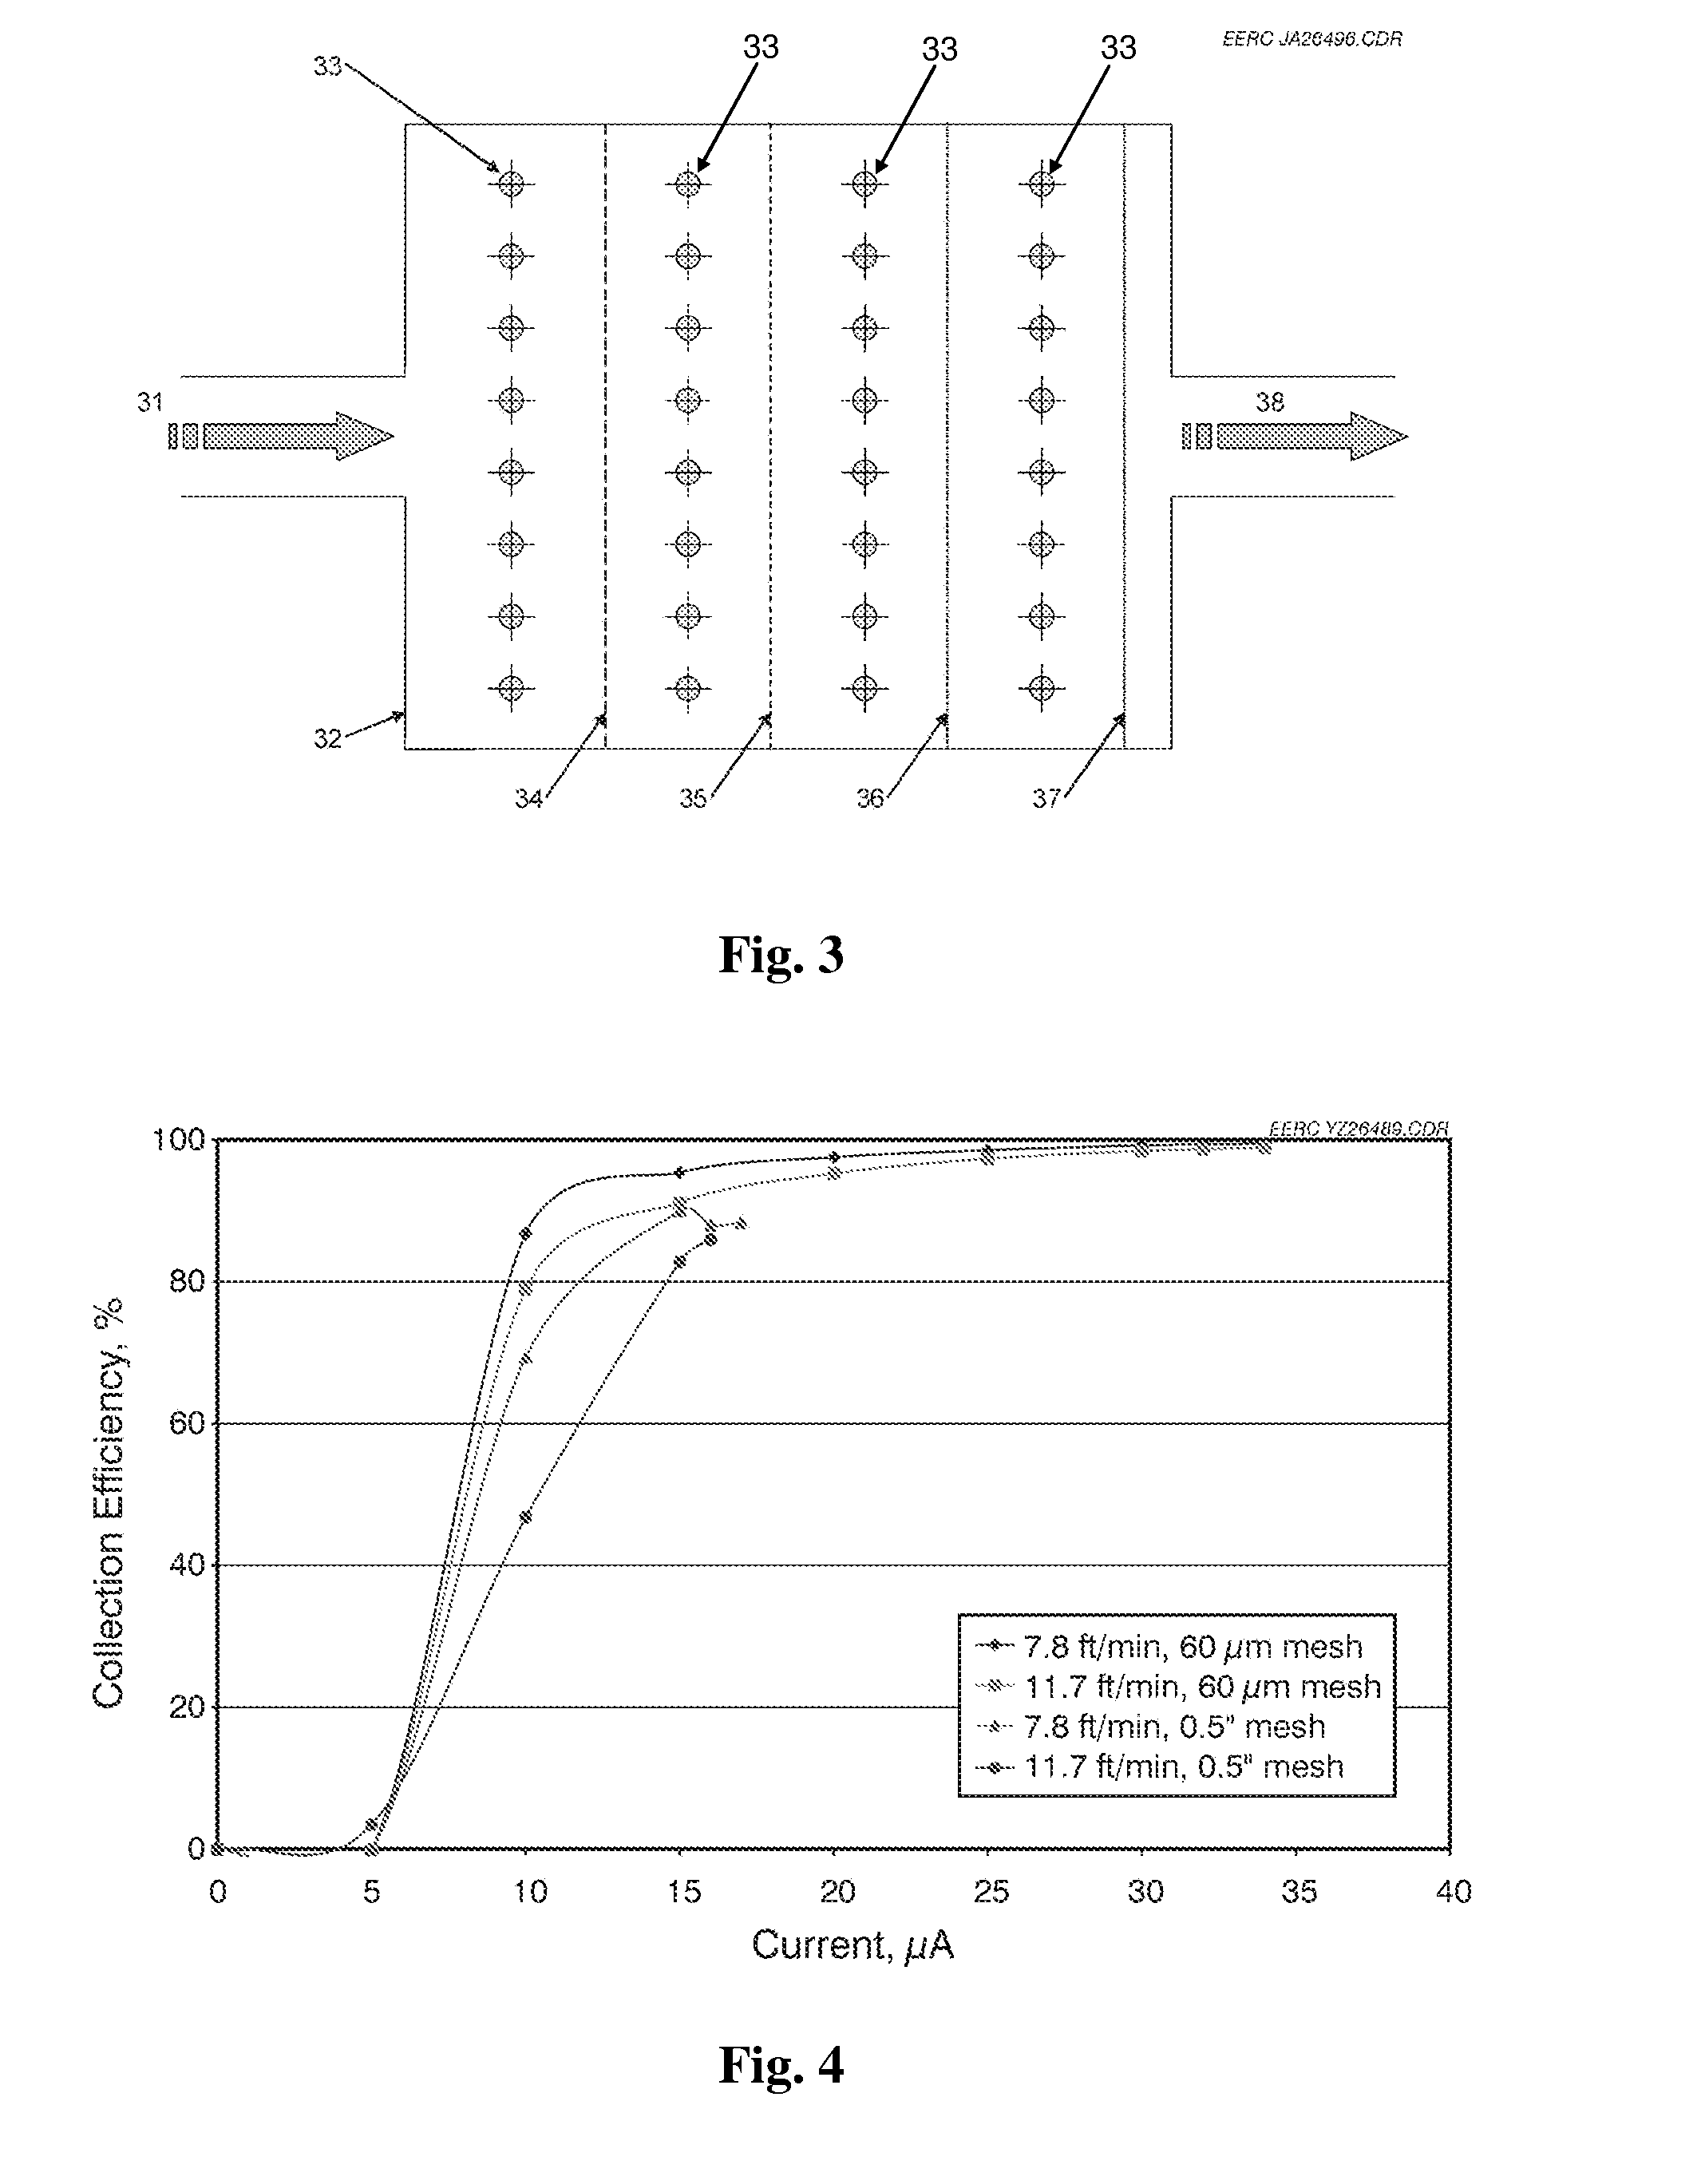 Advanced particulate matter control apparatus and methods